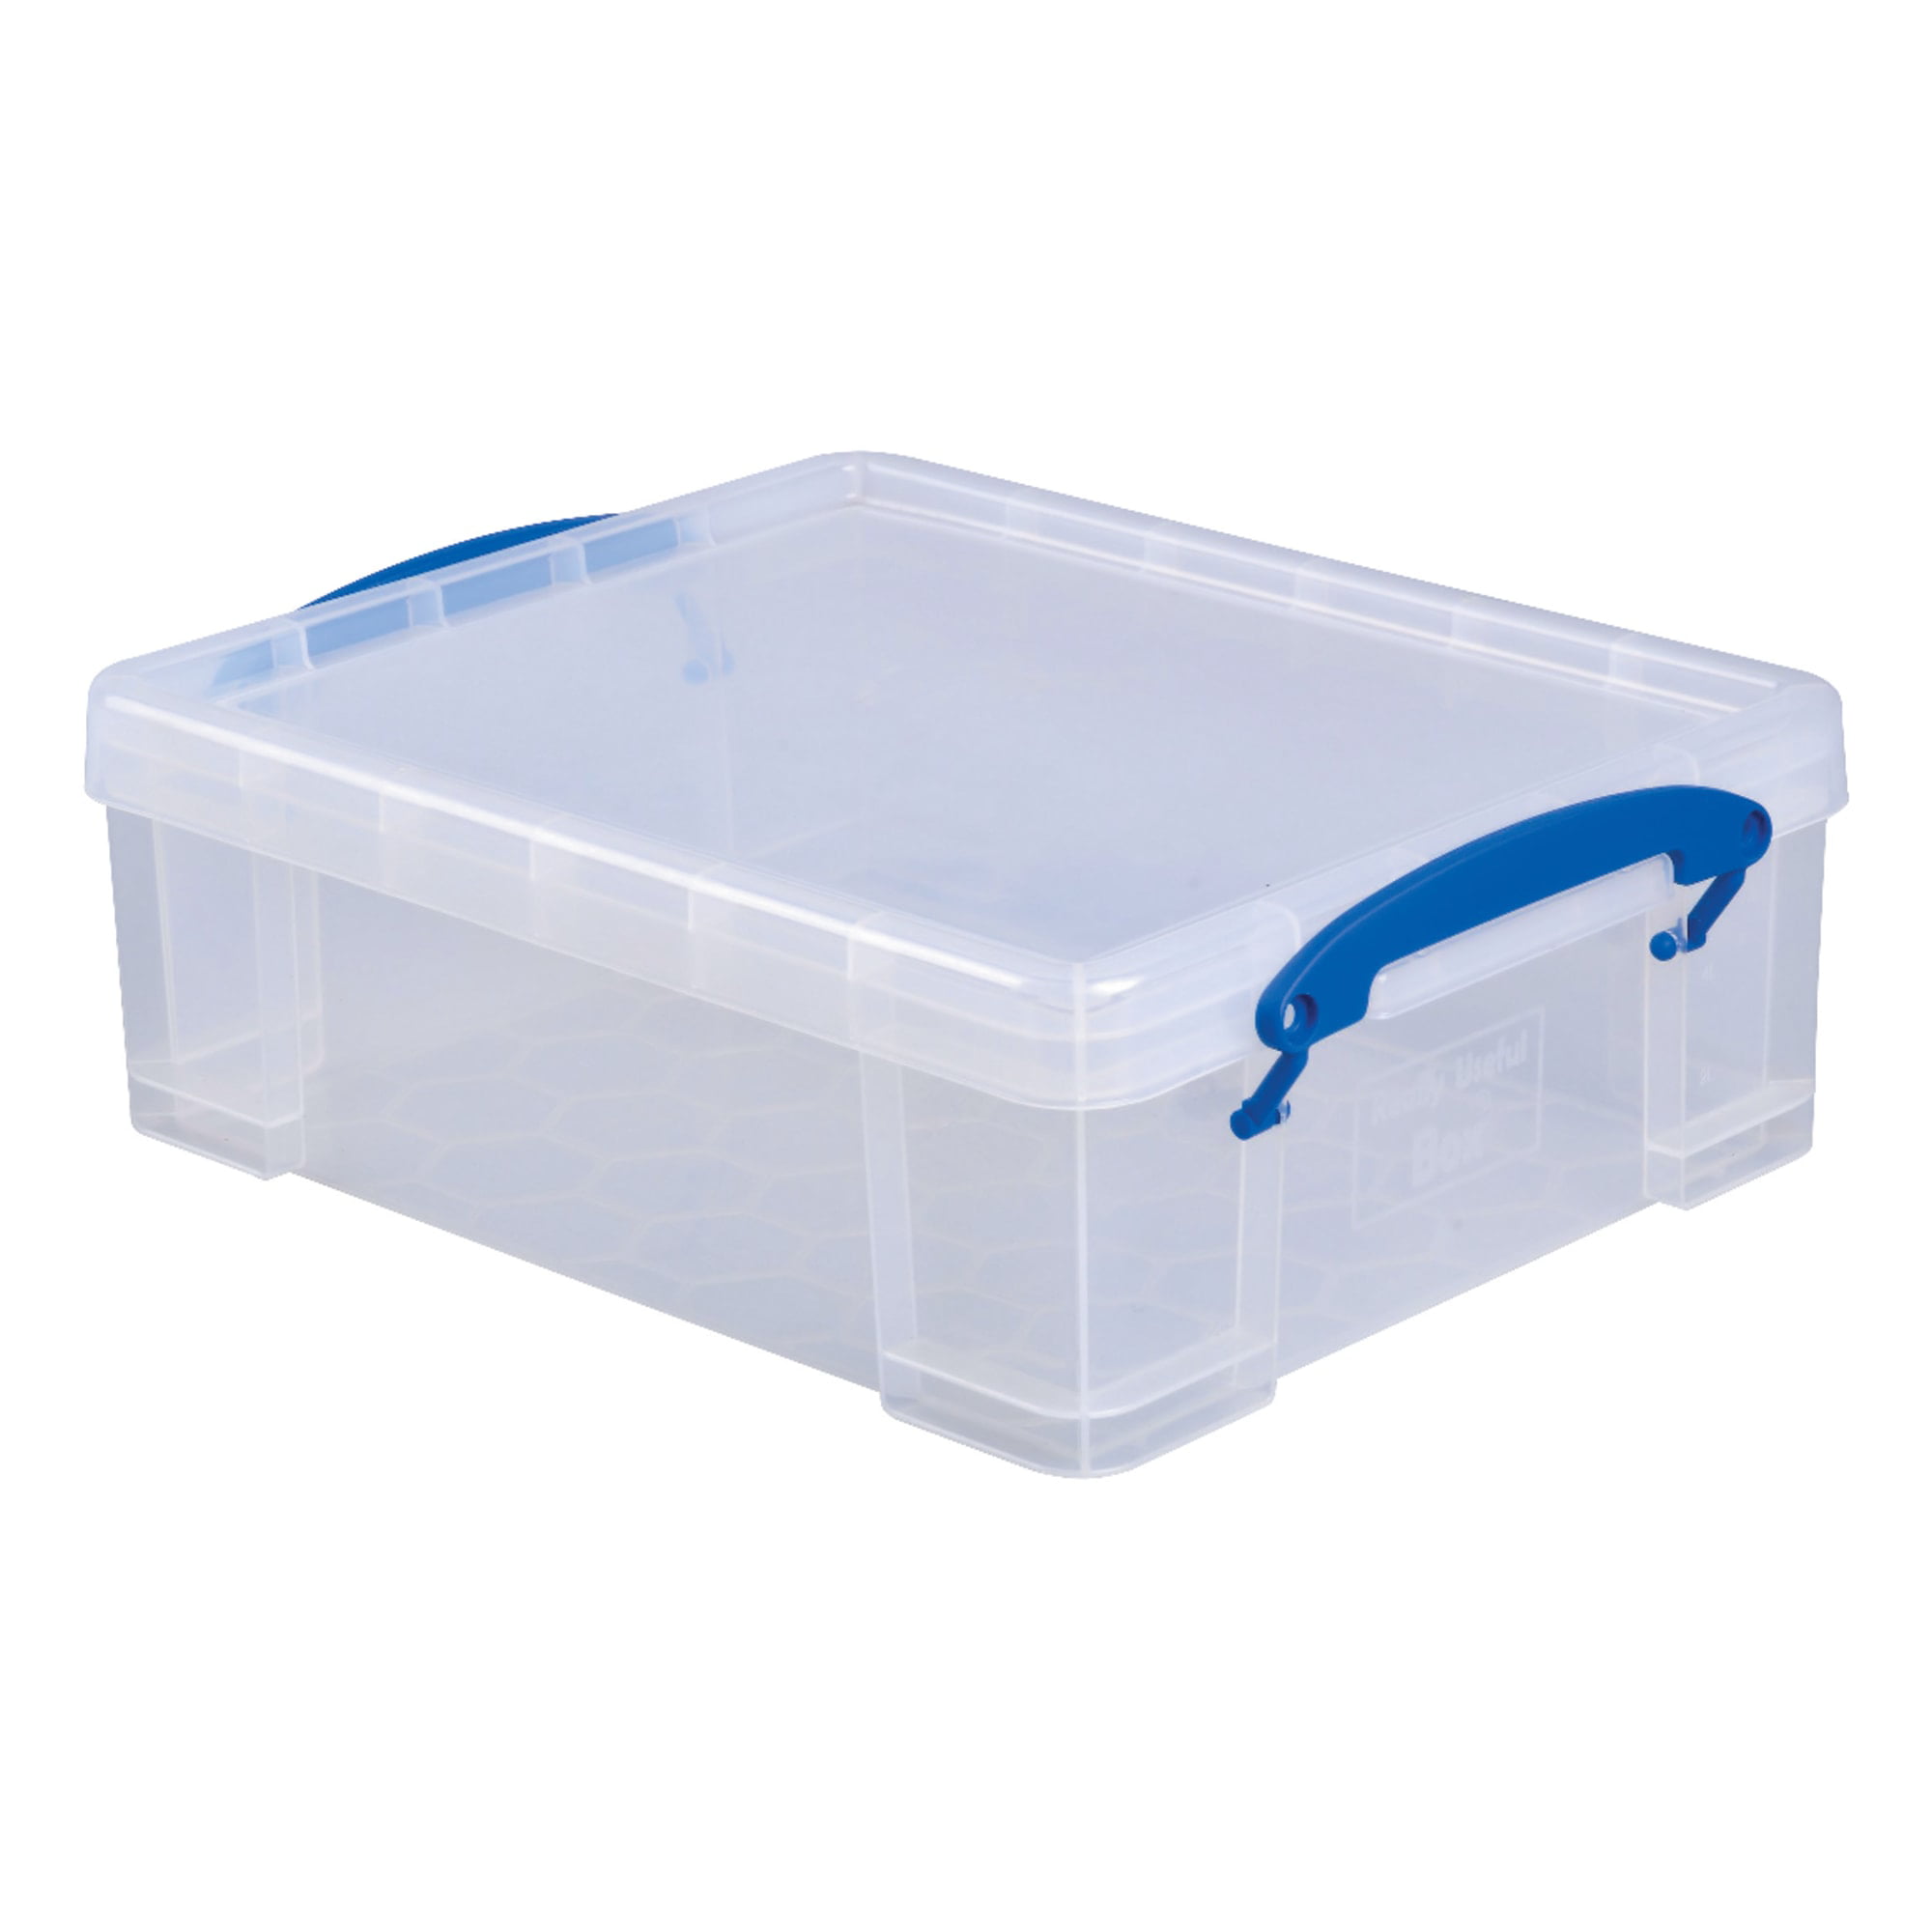 Clear Plastic Organizer 16 X 0.14 Liter Storage Boxes Pack Of 16 Assorted Colors 